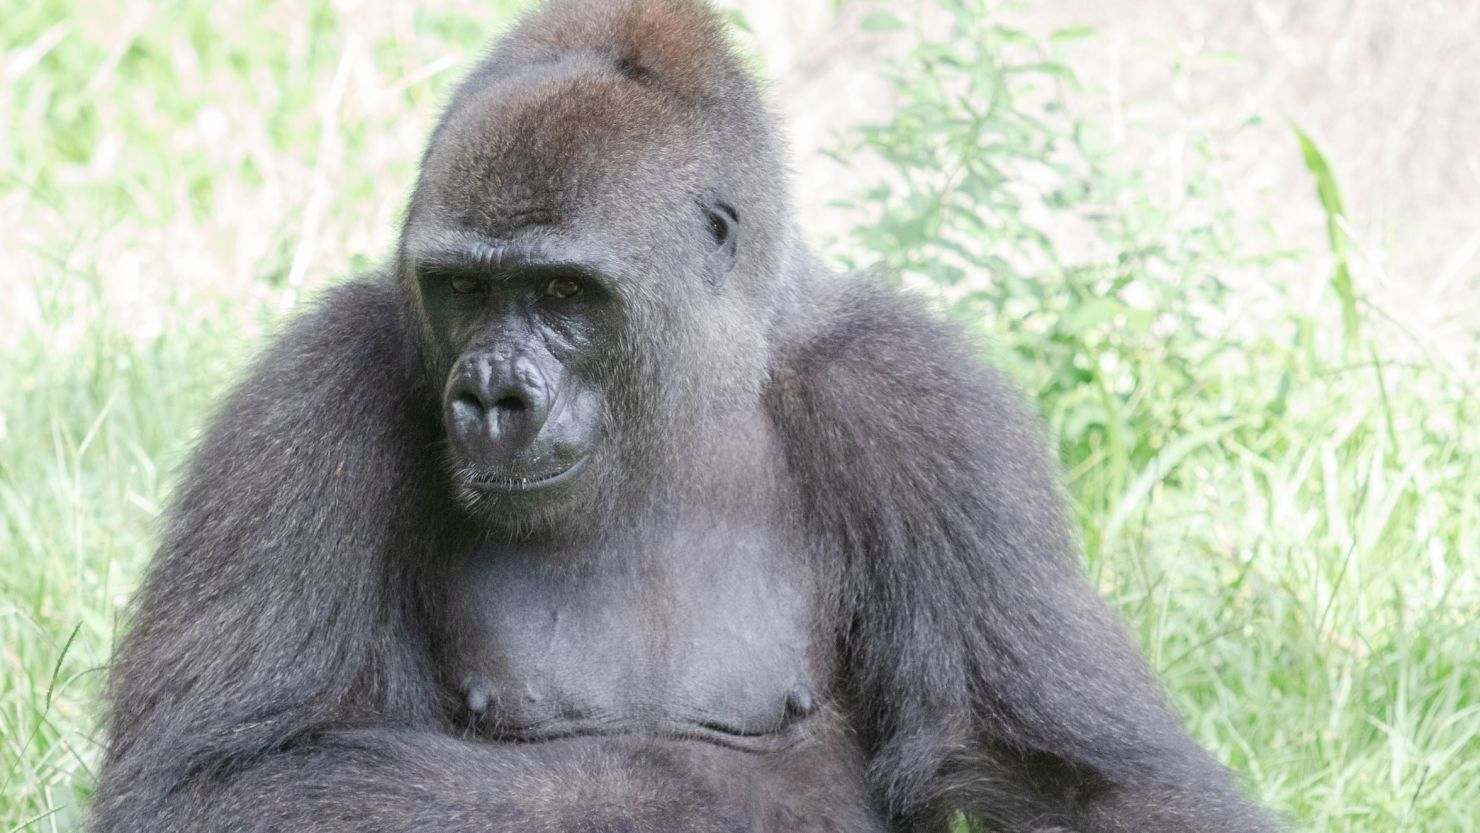 Tumani, a western lowland gorilla at the Audubon Zoo in New Orleans, is pregnant.